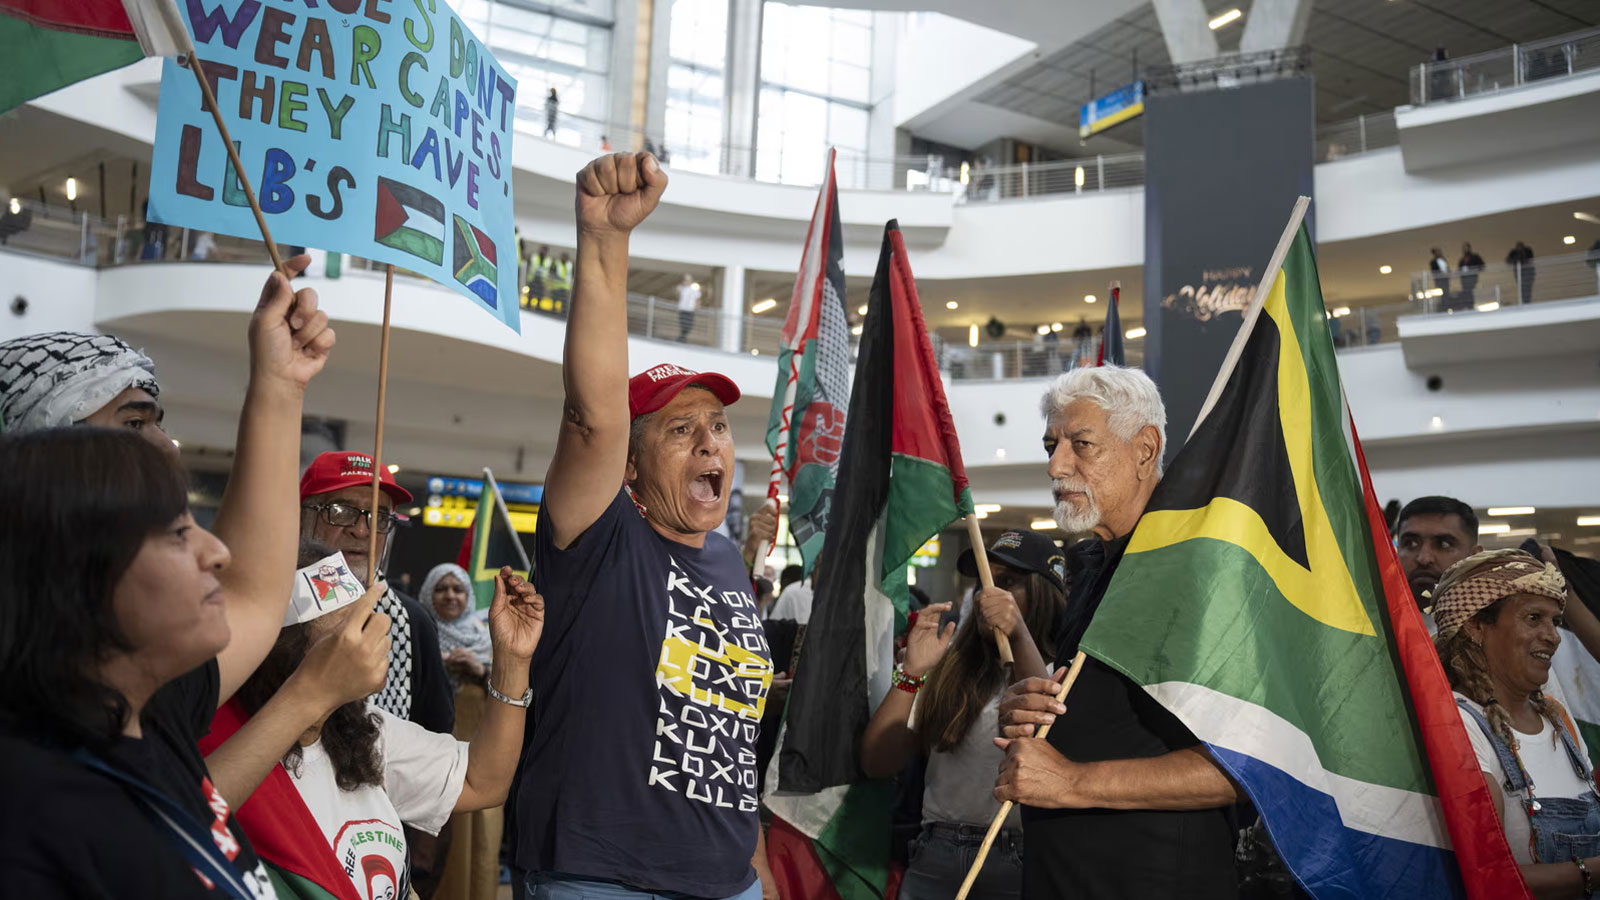 It’s not only Israel on trial. South Africa is testing the west’s claim to moral superiority